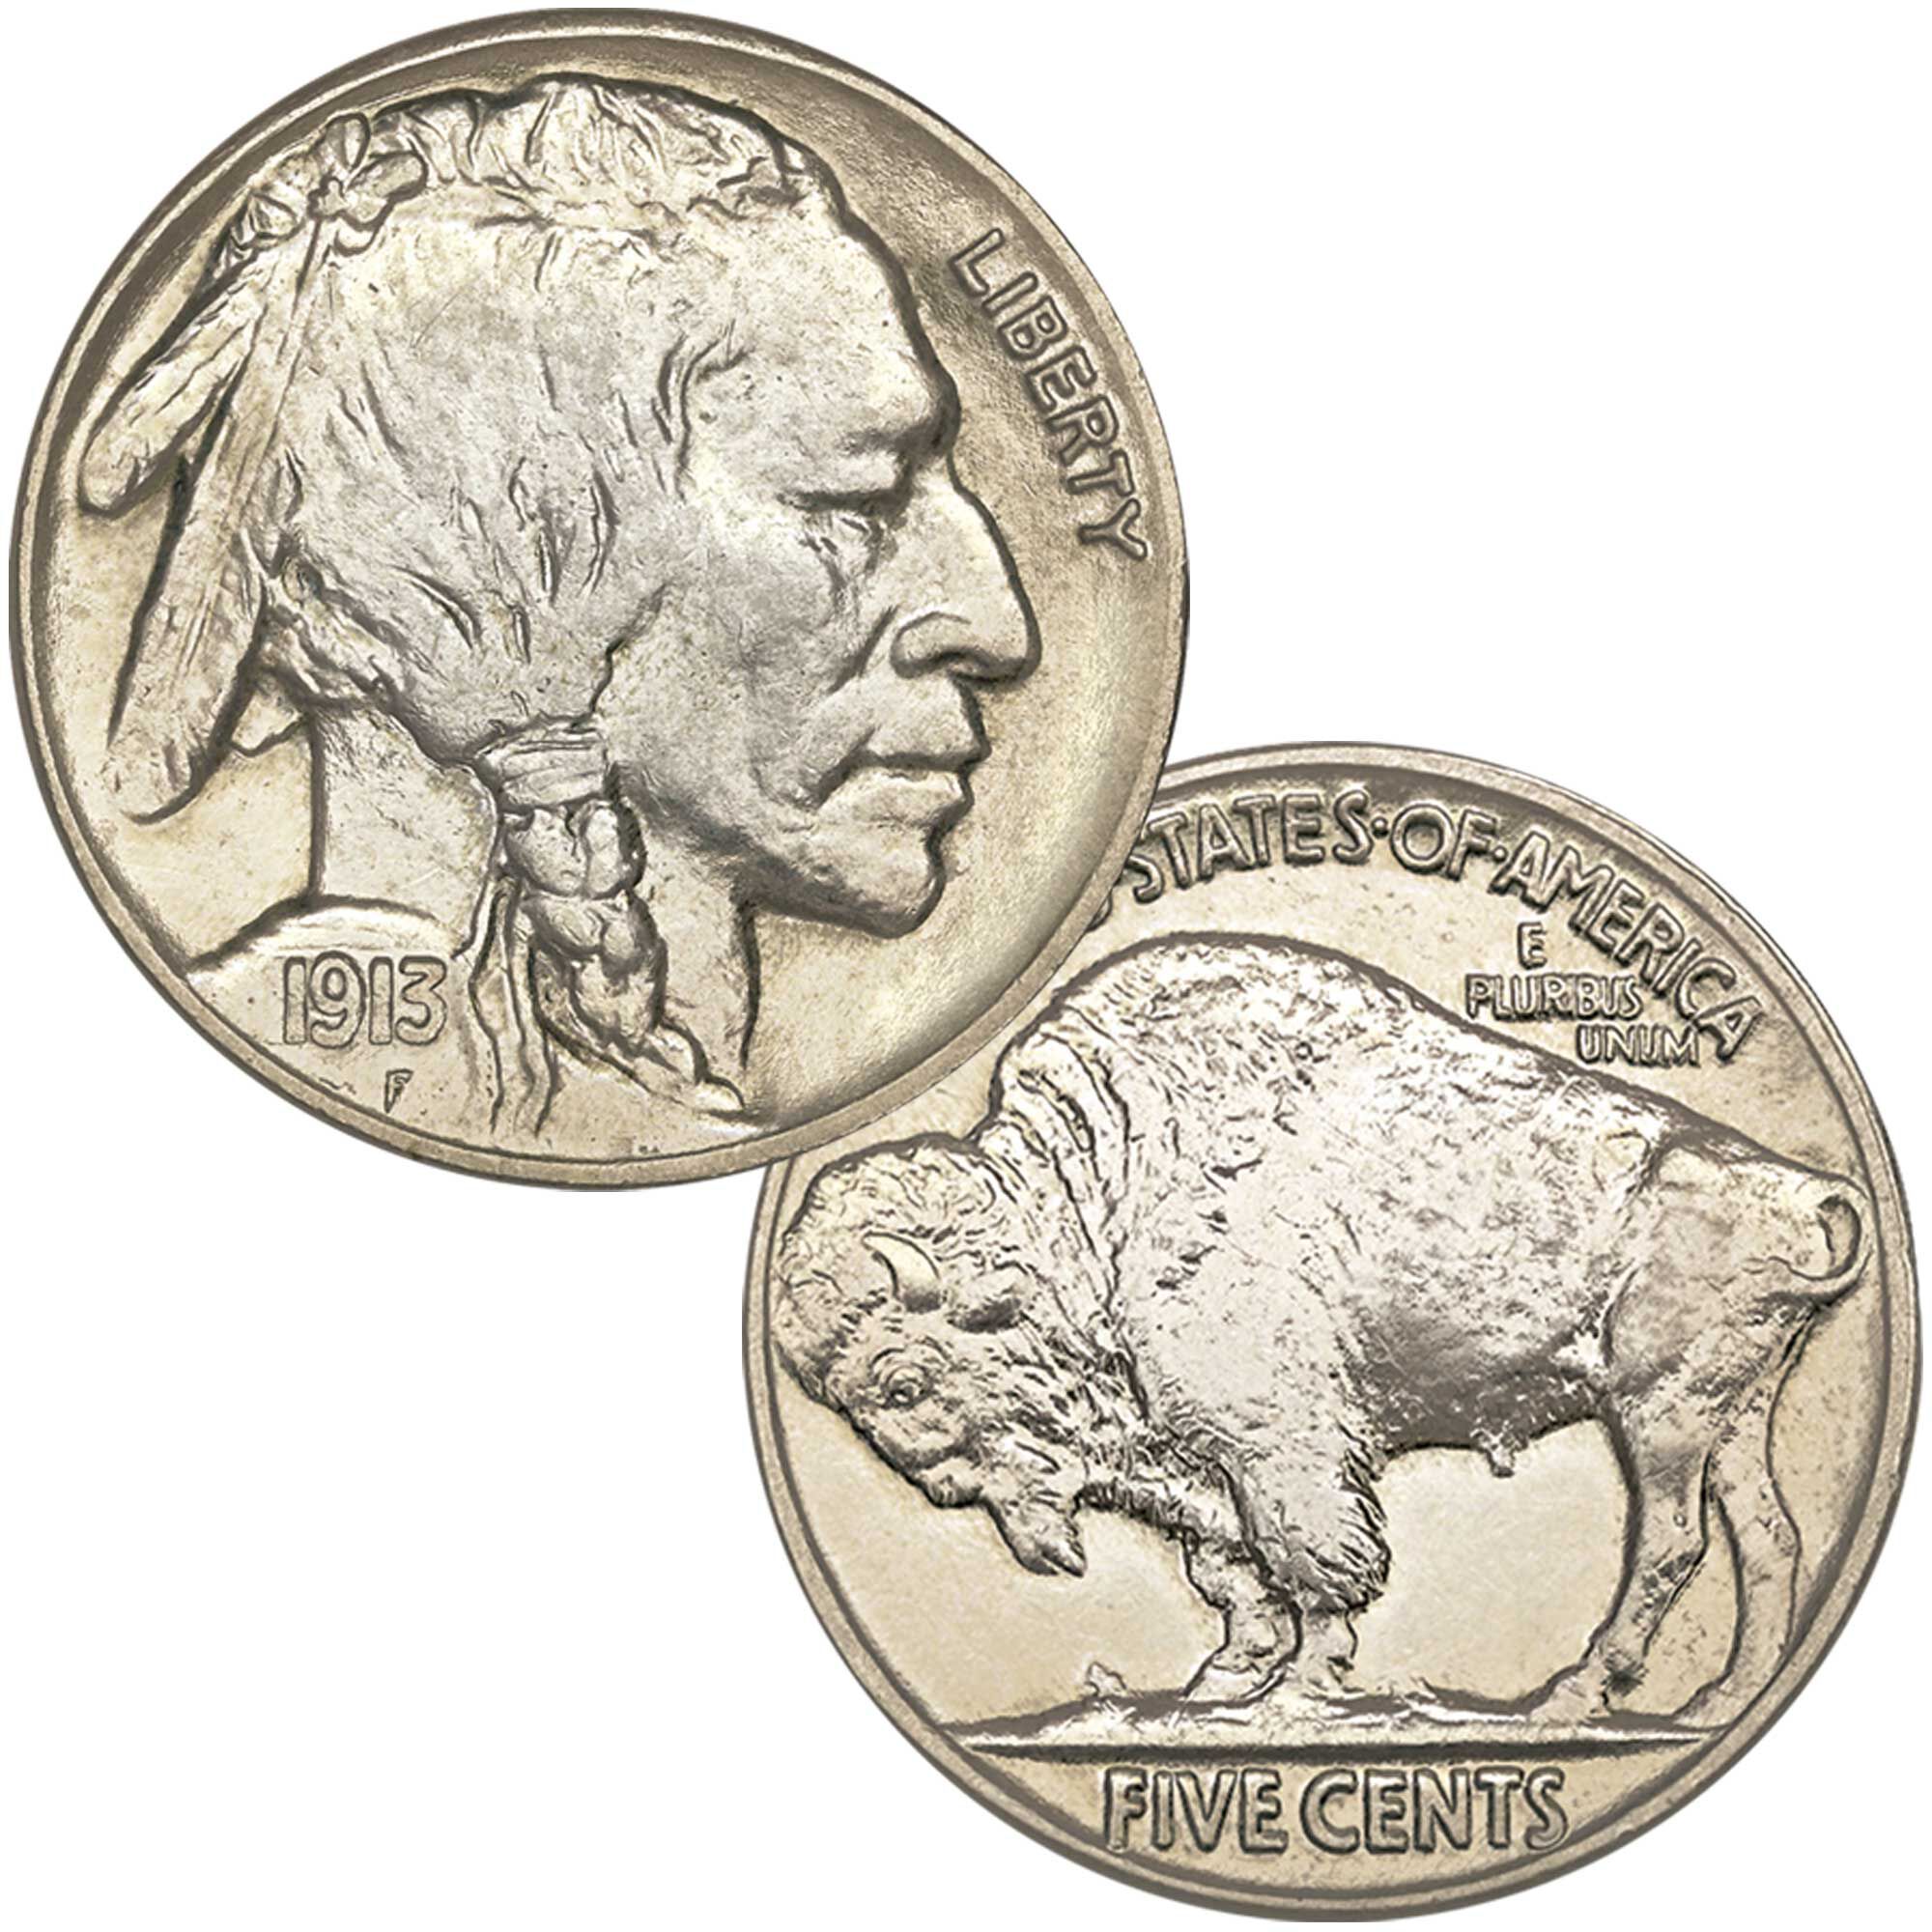 The Wonderful World Of Buffalo Nickel Collecting: An Appreciation Of The  “Most American” Of All Coin Designs